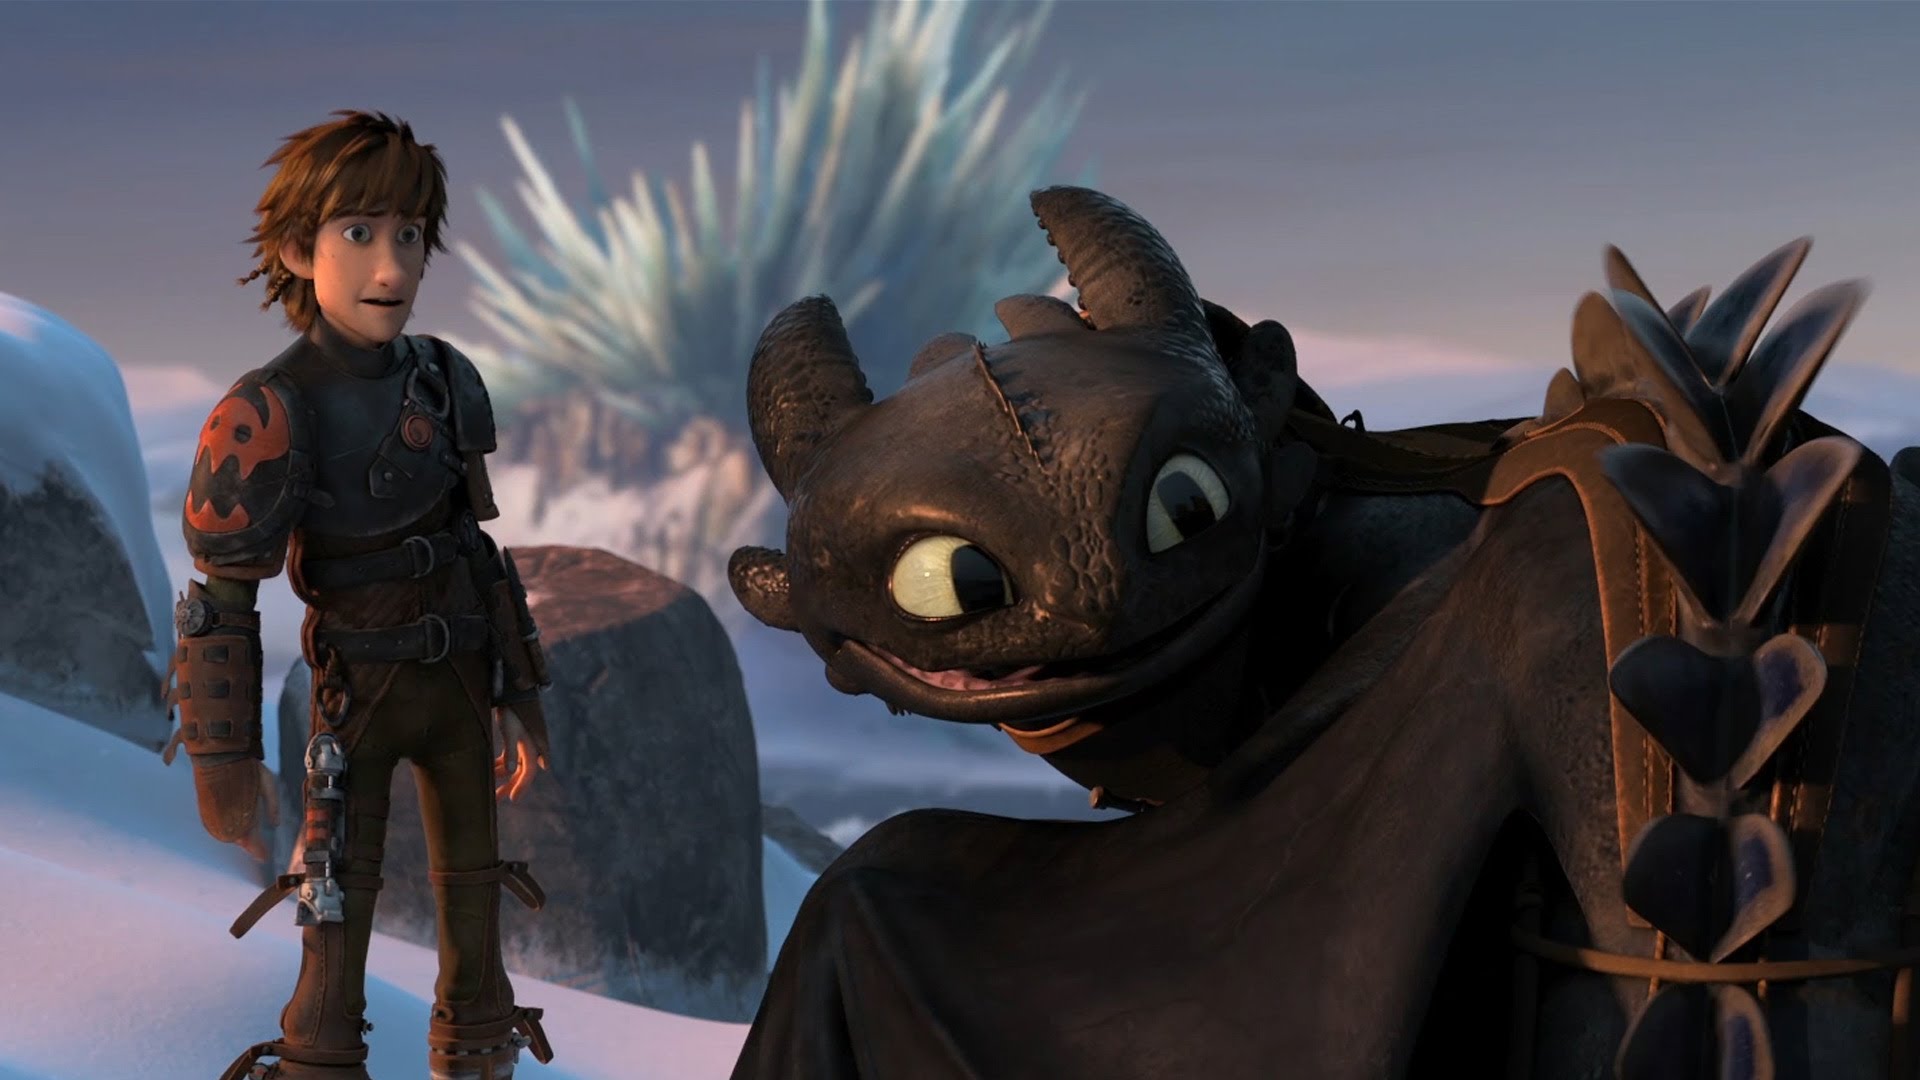 How To Train Your Dragon 2 #3